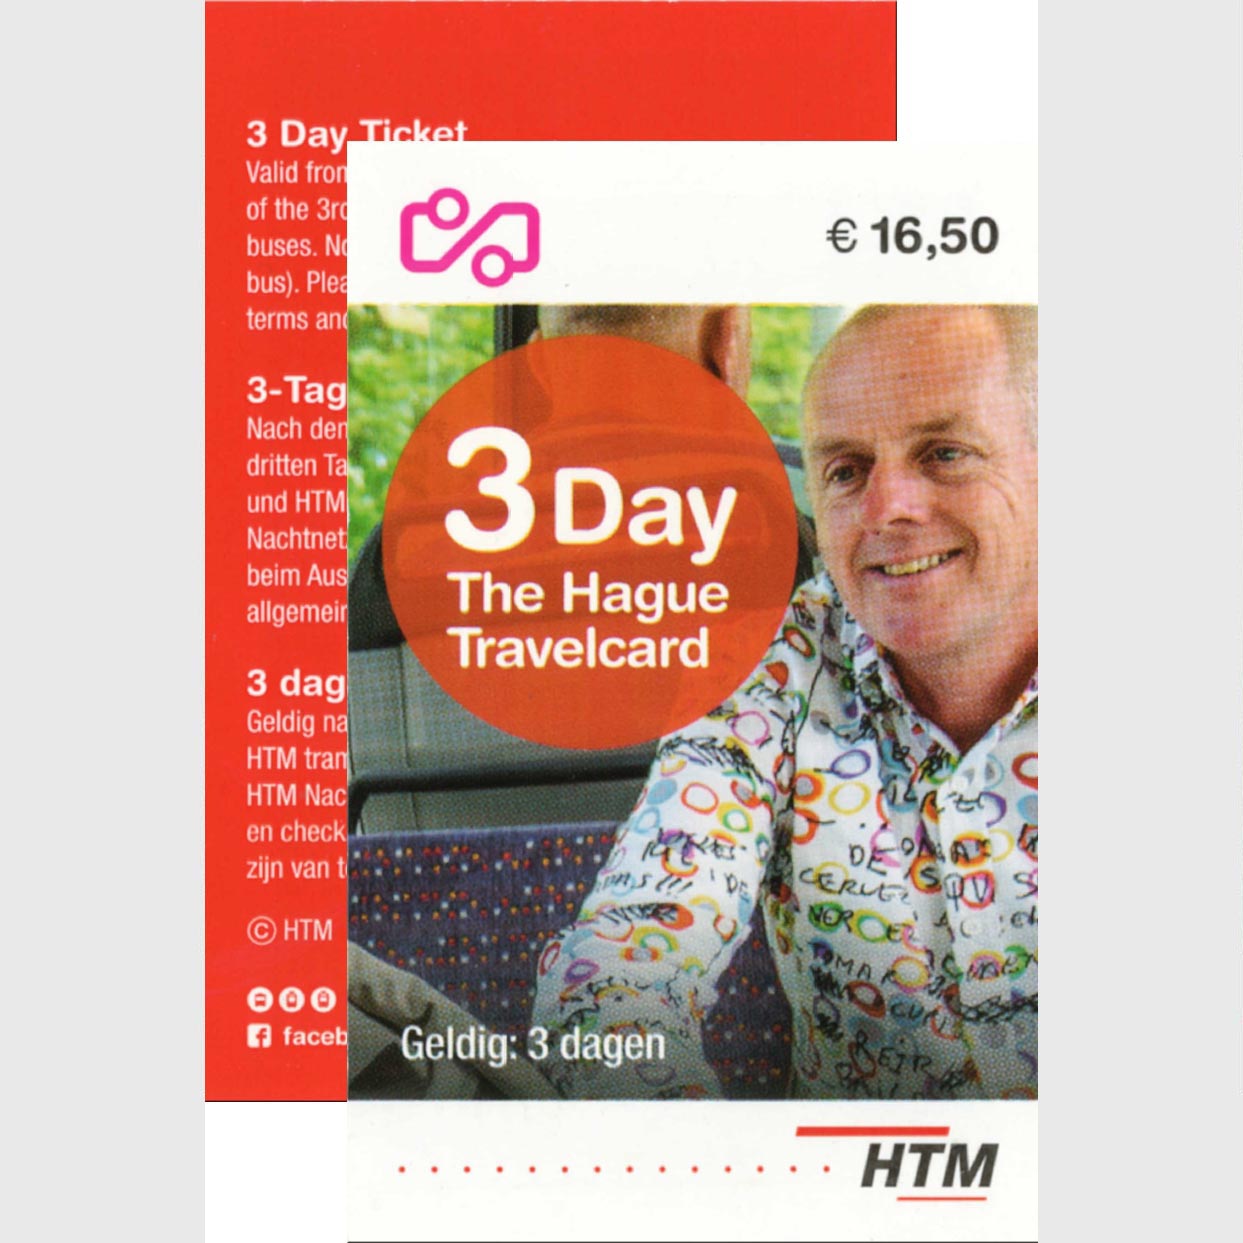 The Hague 3 day ticket